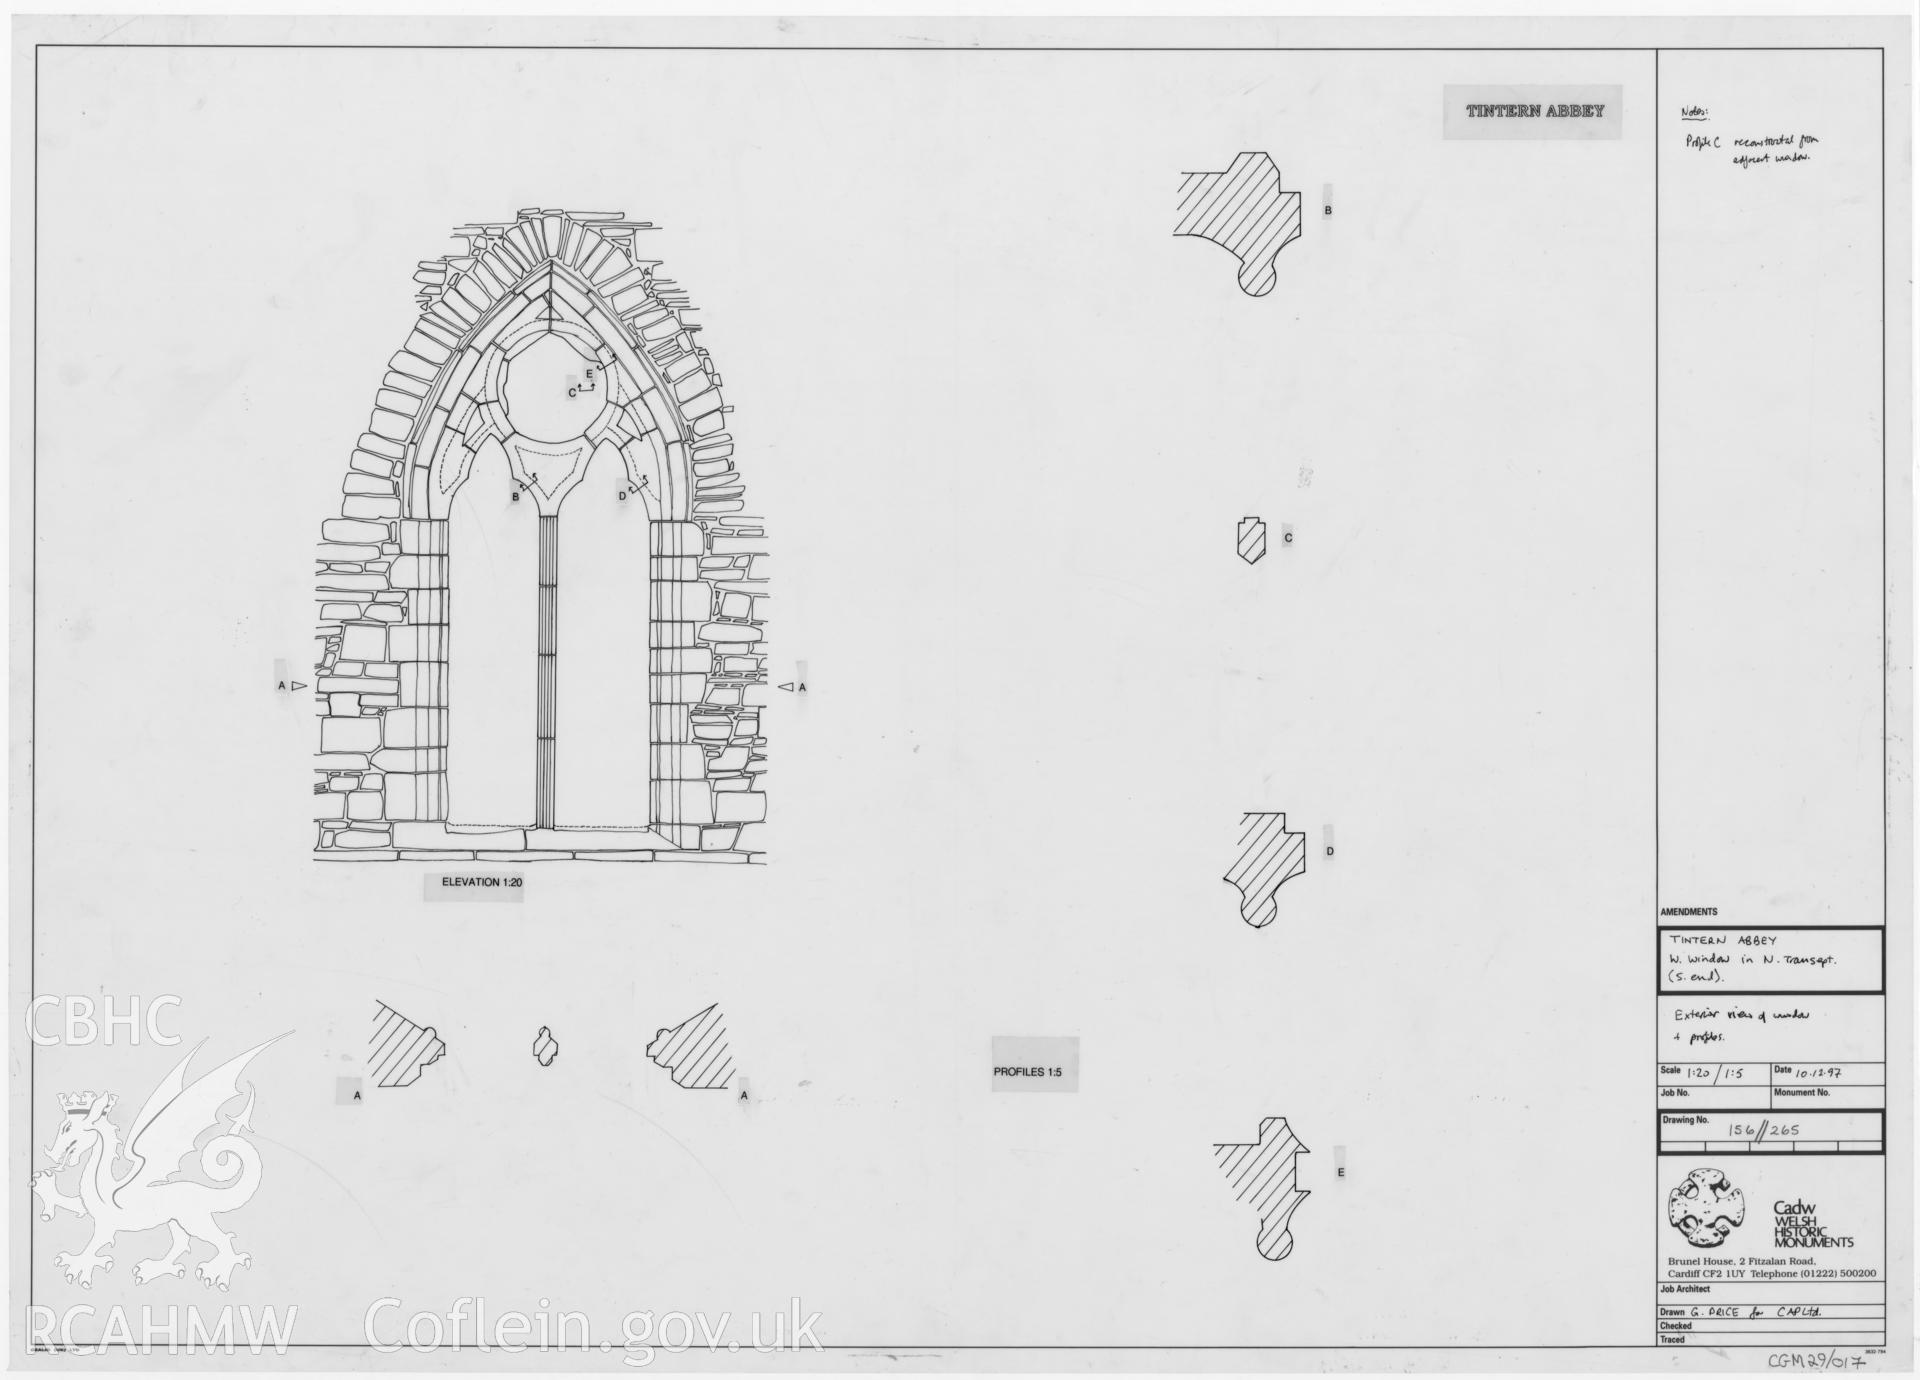 Digital copy of Cadw guardianship monument drawing of Tintern Abbey, exterior view and profiles of west window in north transept, dated 10th December 1997..